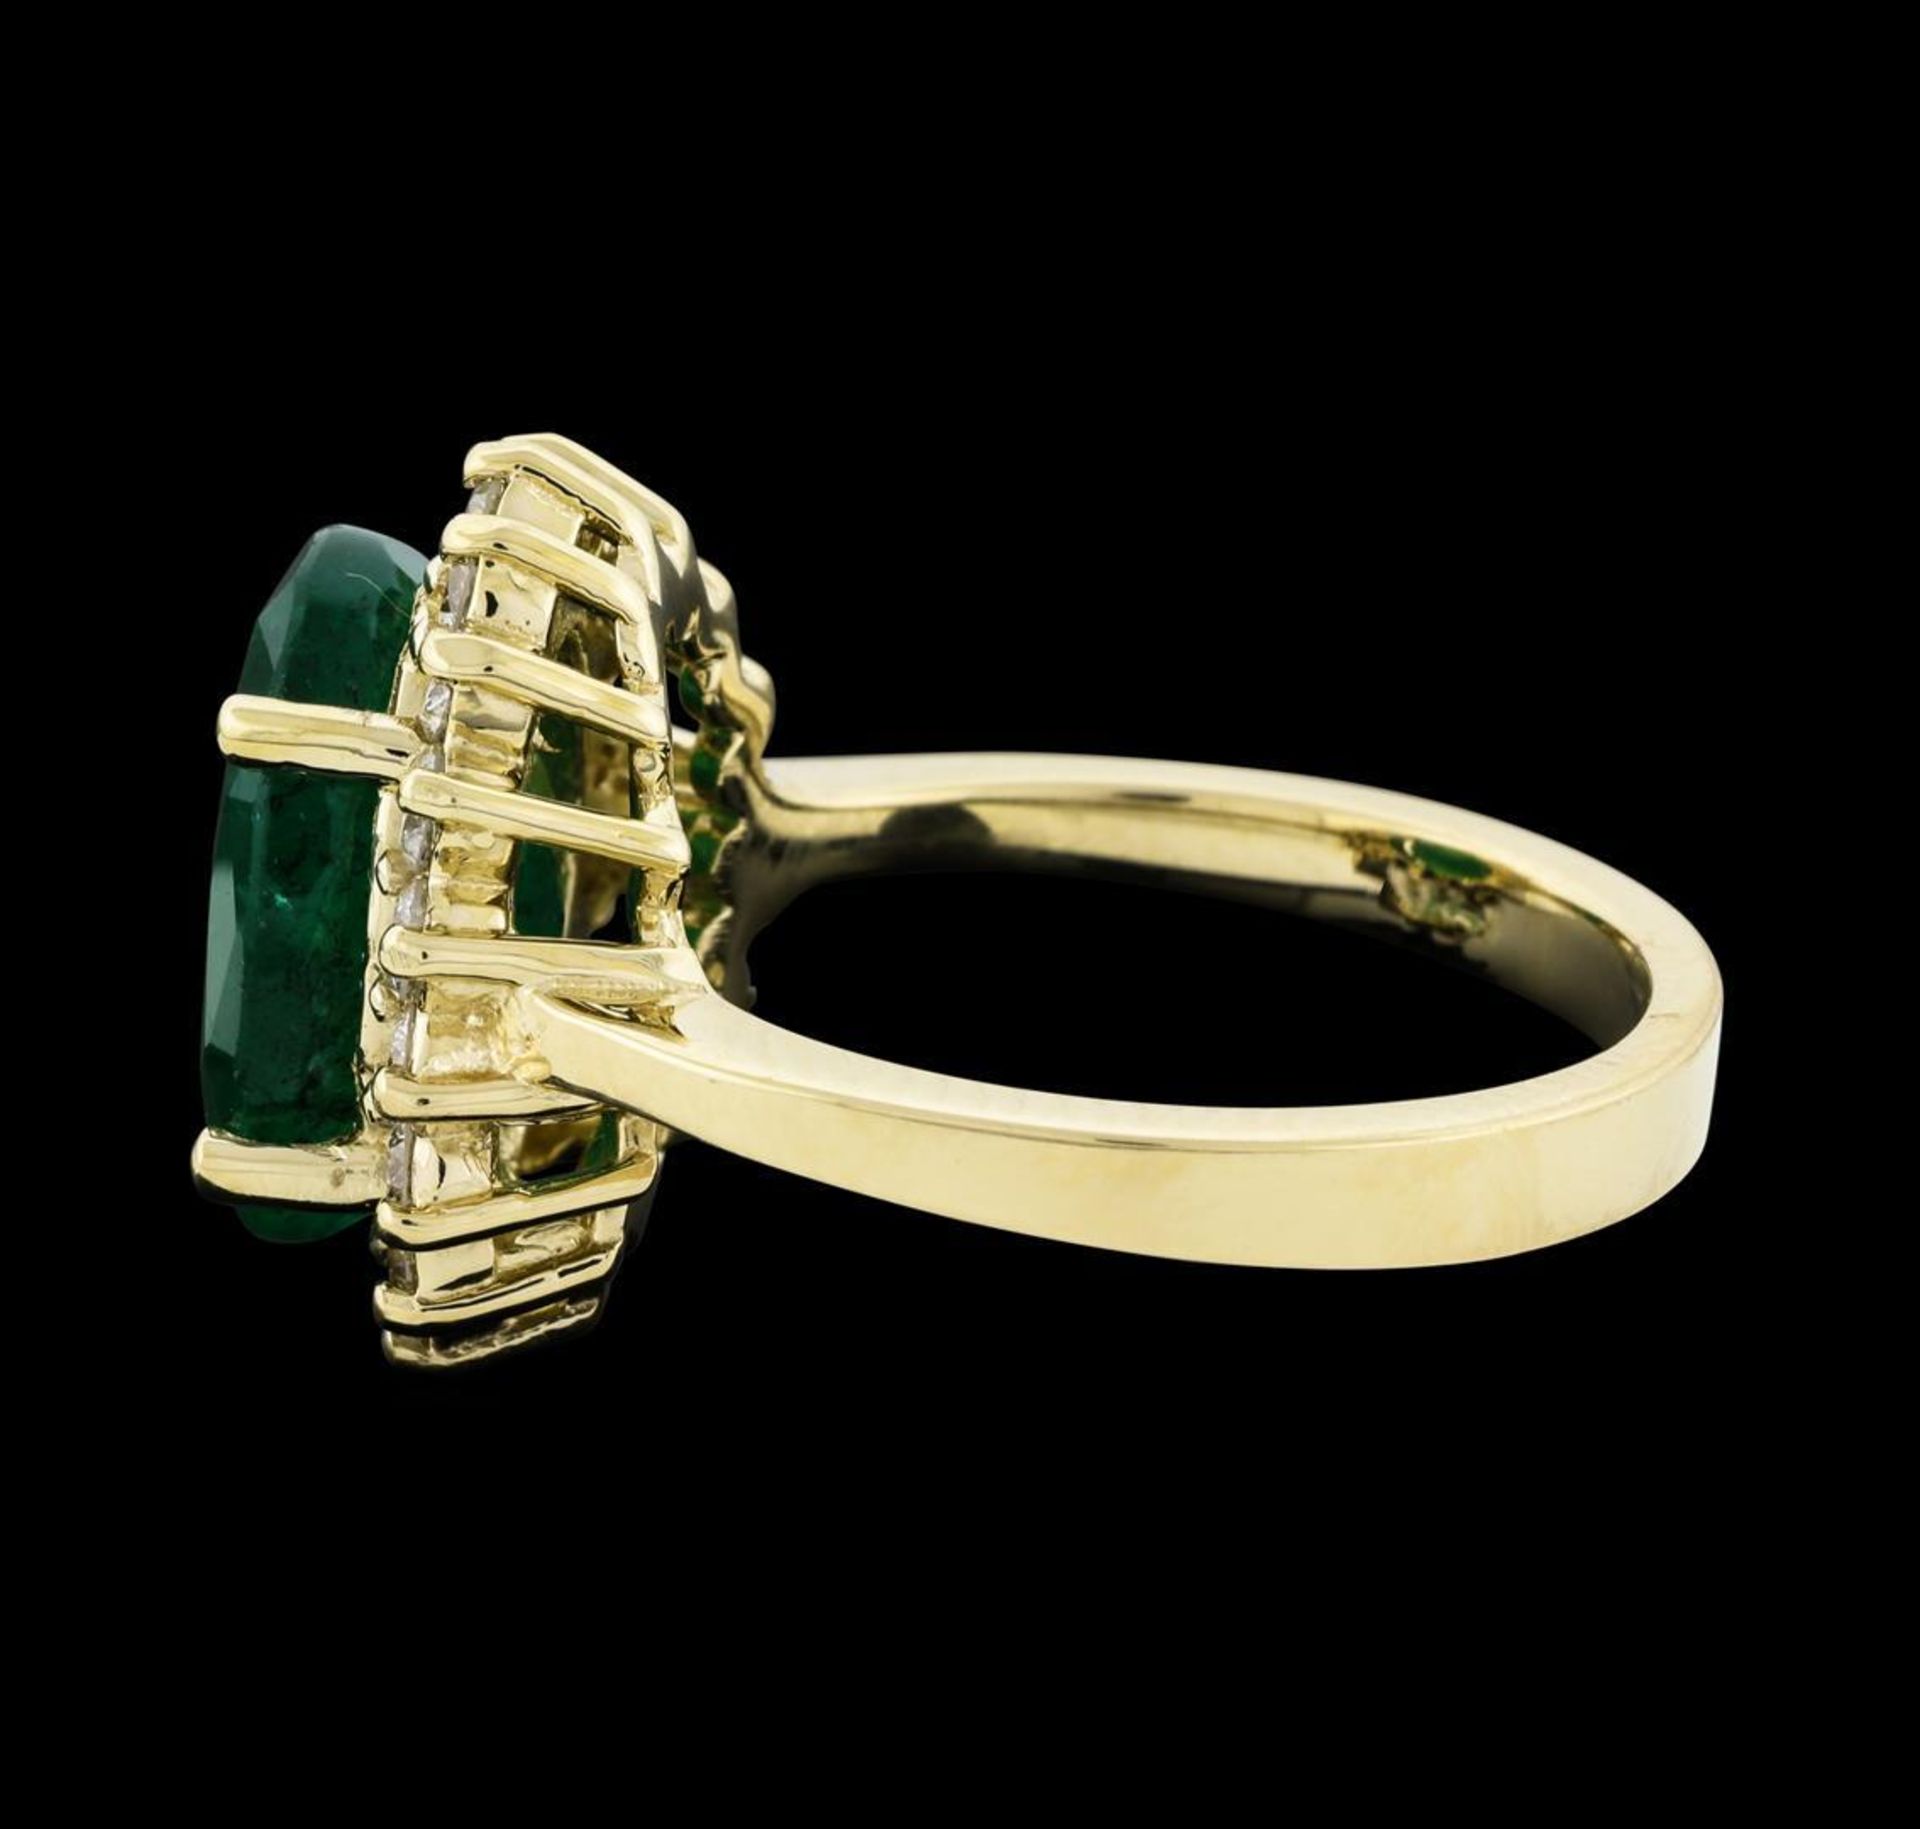 4.41 ctw Emerald and Diamond Ring - 14KT Yellow Gold - Image 3 of 5